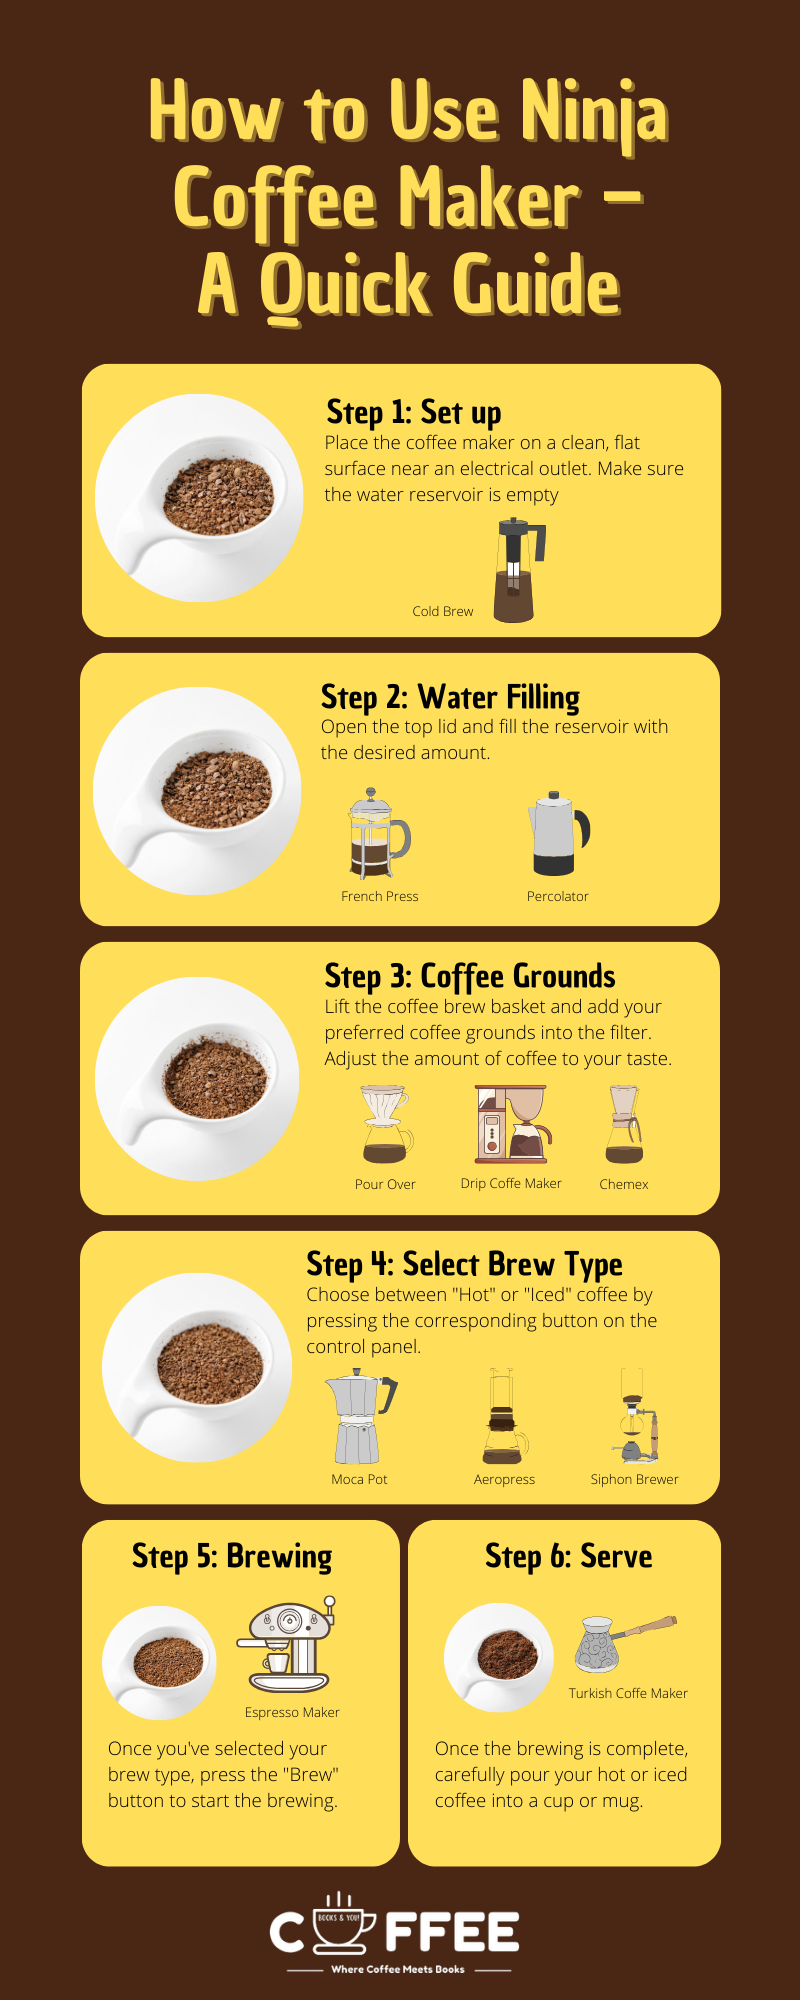 How to Use Ninja Coffee Maker – A Quick Guide